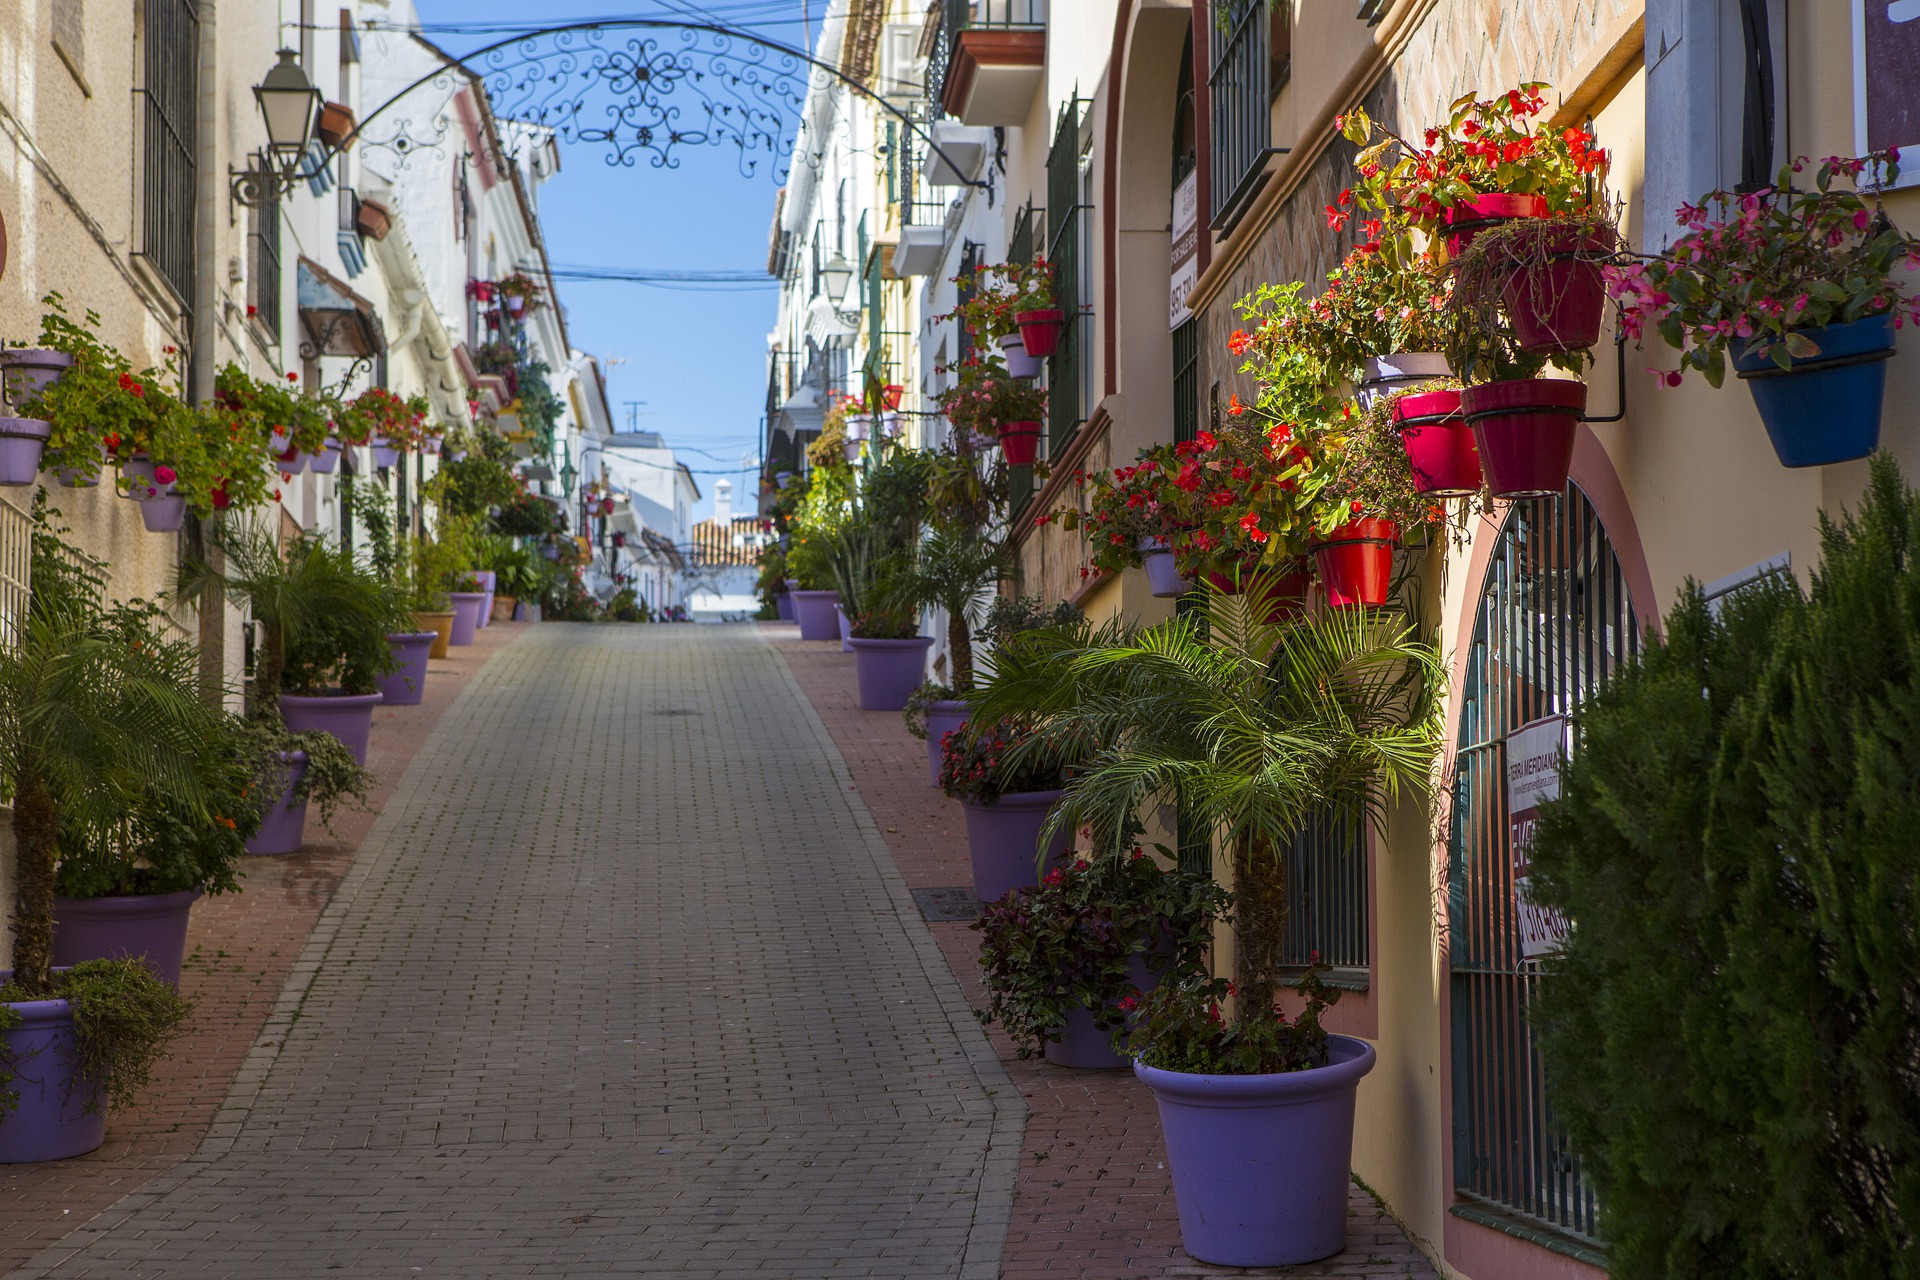 cobblestone road with shops and buildings in costa del sol spain